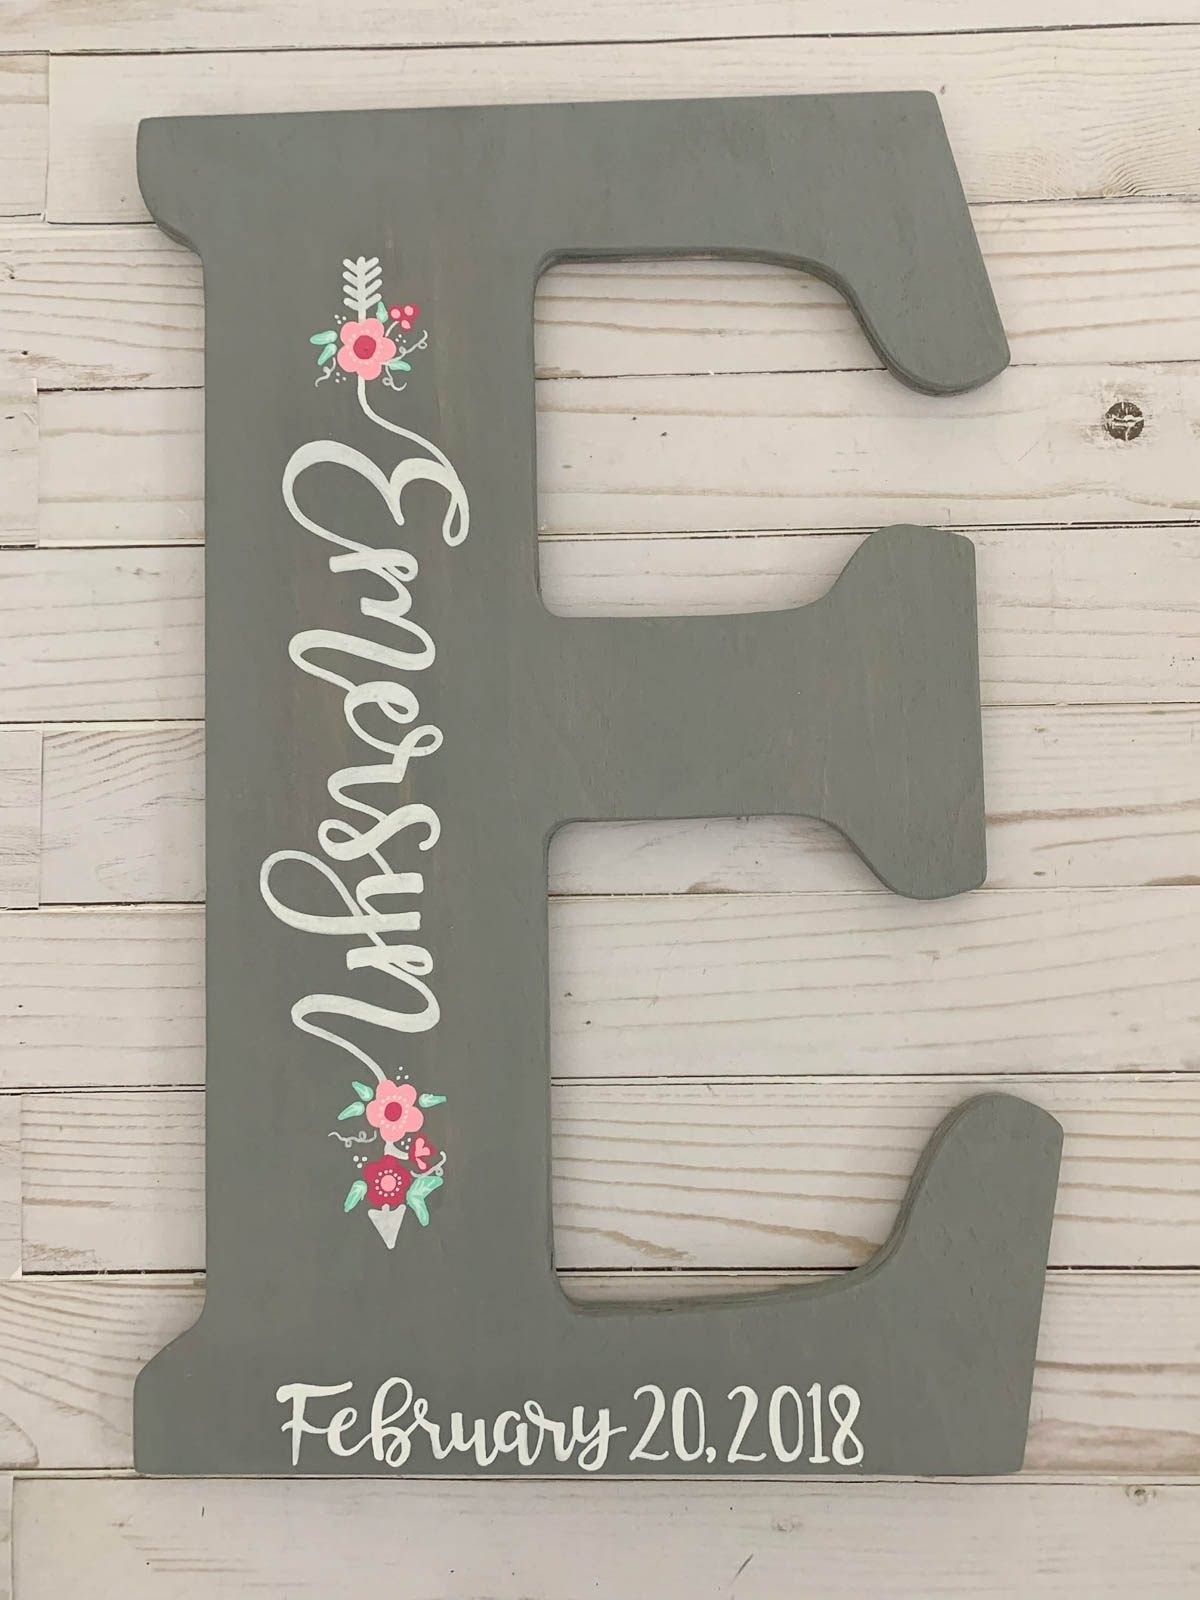 Decorative letter to hang on the wall in a baby's room